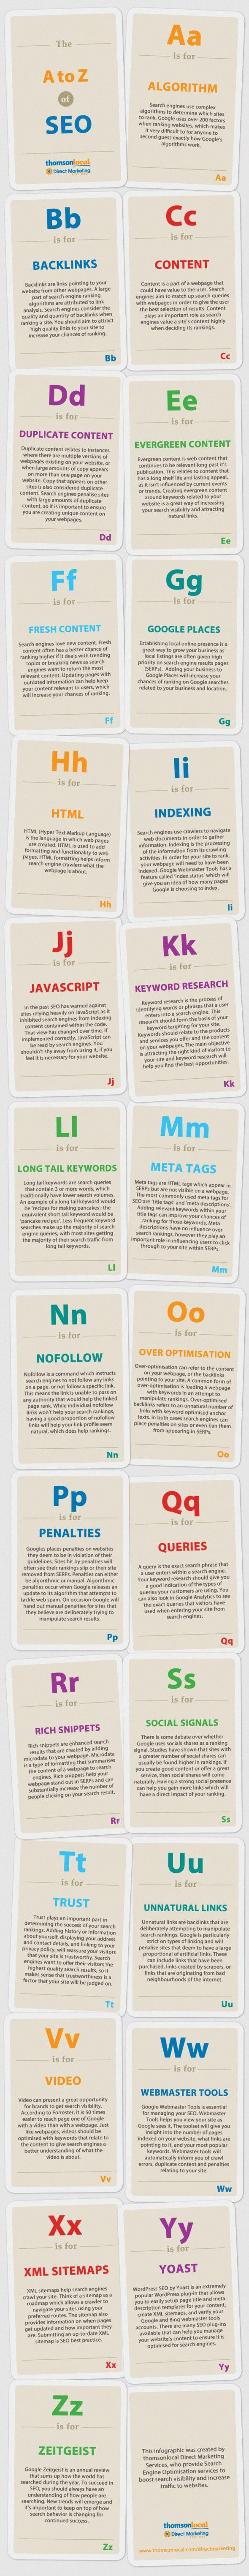 the-ultimate-a-z-of-seo-for-beginners